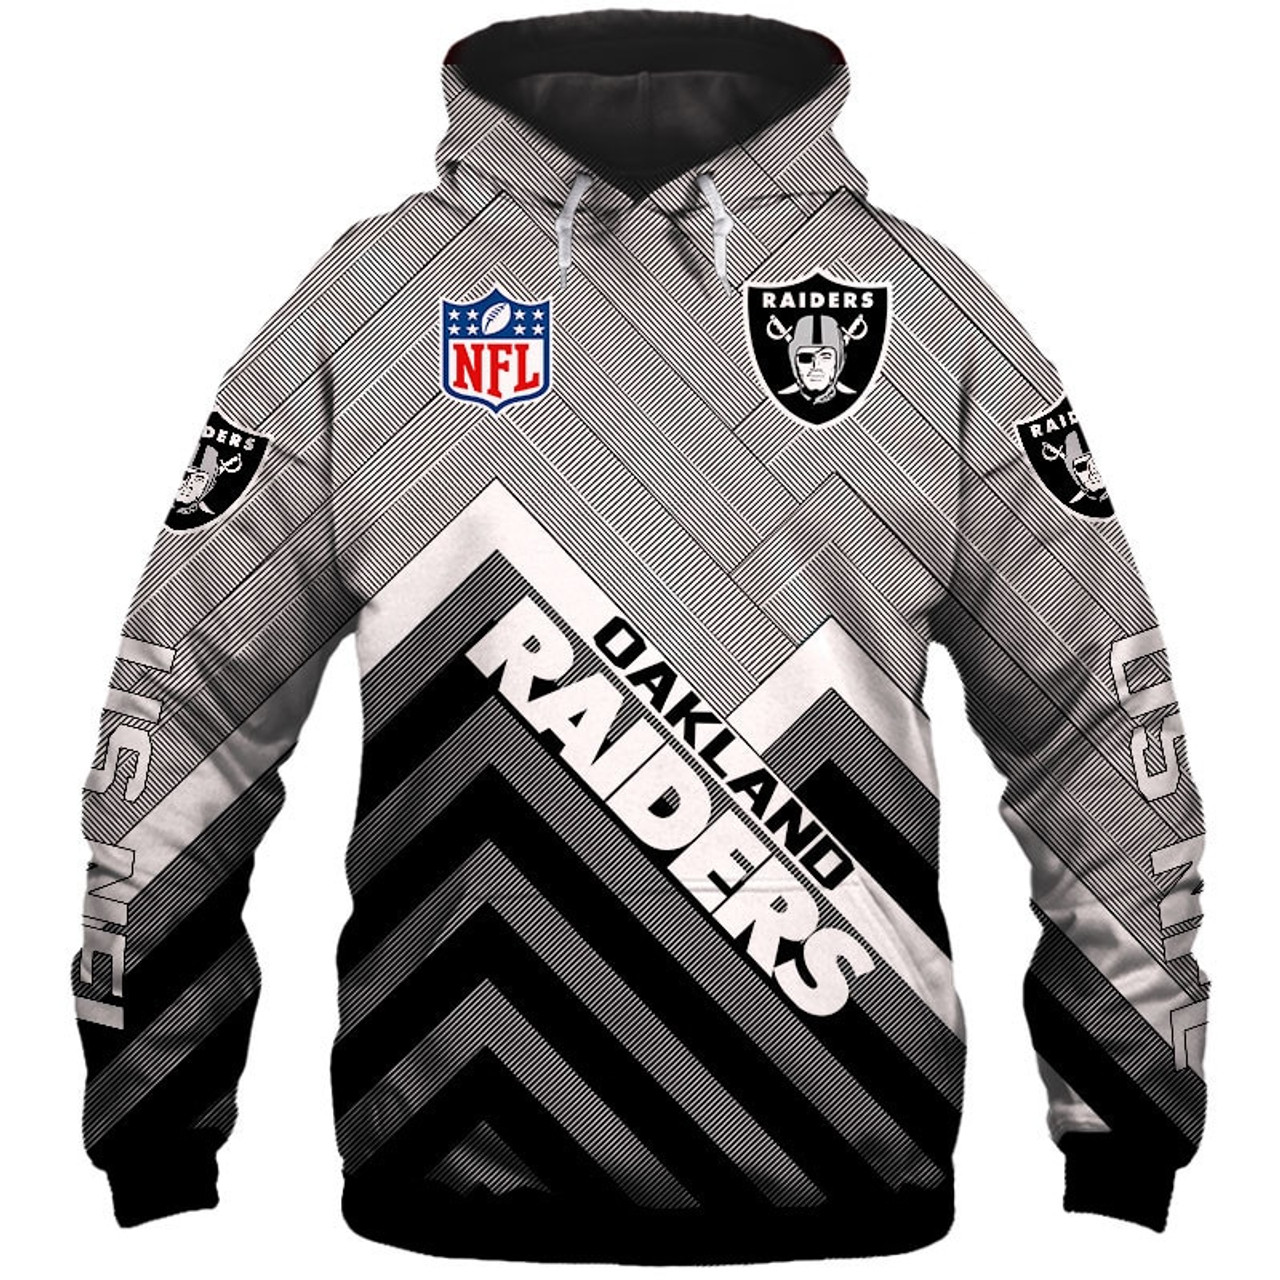  **(NEW-OFFICIAL-N.F.L.OAKLAND-RAIDERS-PULLOVER-HOODIES/3D-CUSTOM-RAIDERS-LOGOS & OFFICIAL-RAIDERS-TEAM-COLORS/NICE-3D-DETAILED-GRAPHIC-PRINTED-DOUBLE-SIDED/ALL-OVER-ENTIRE-HOODIE-PRINTED-DESIGN/TRENDY-WARM-PREMIUM-RAIDERS-PULLOVER-HOODIES)**